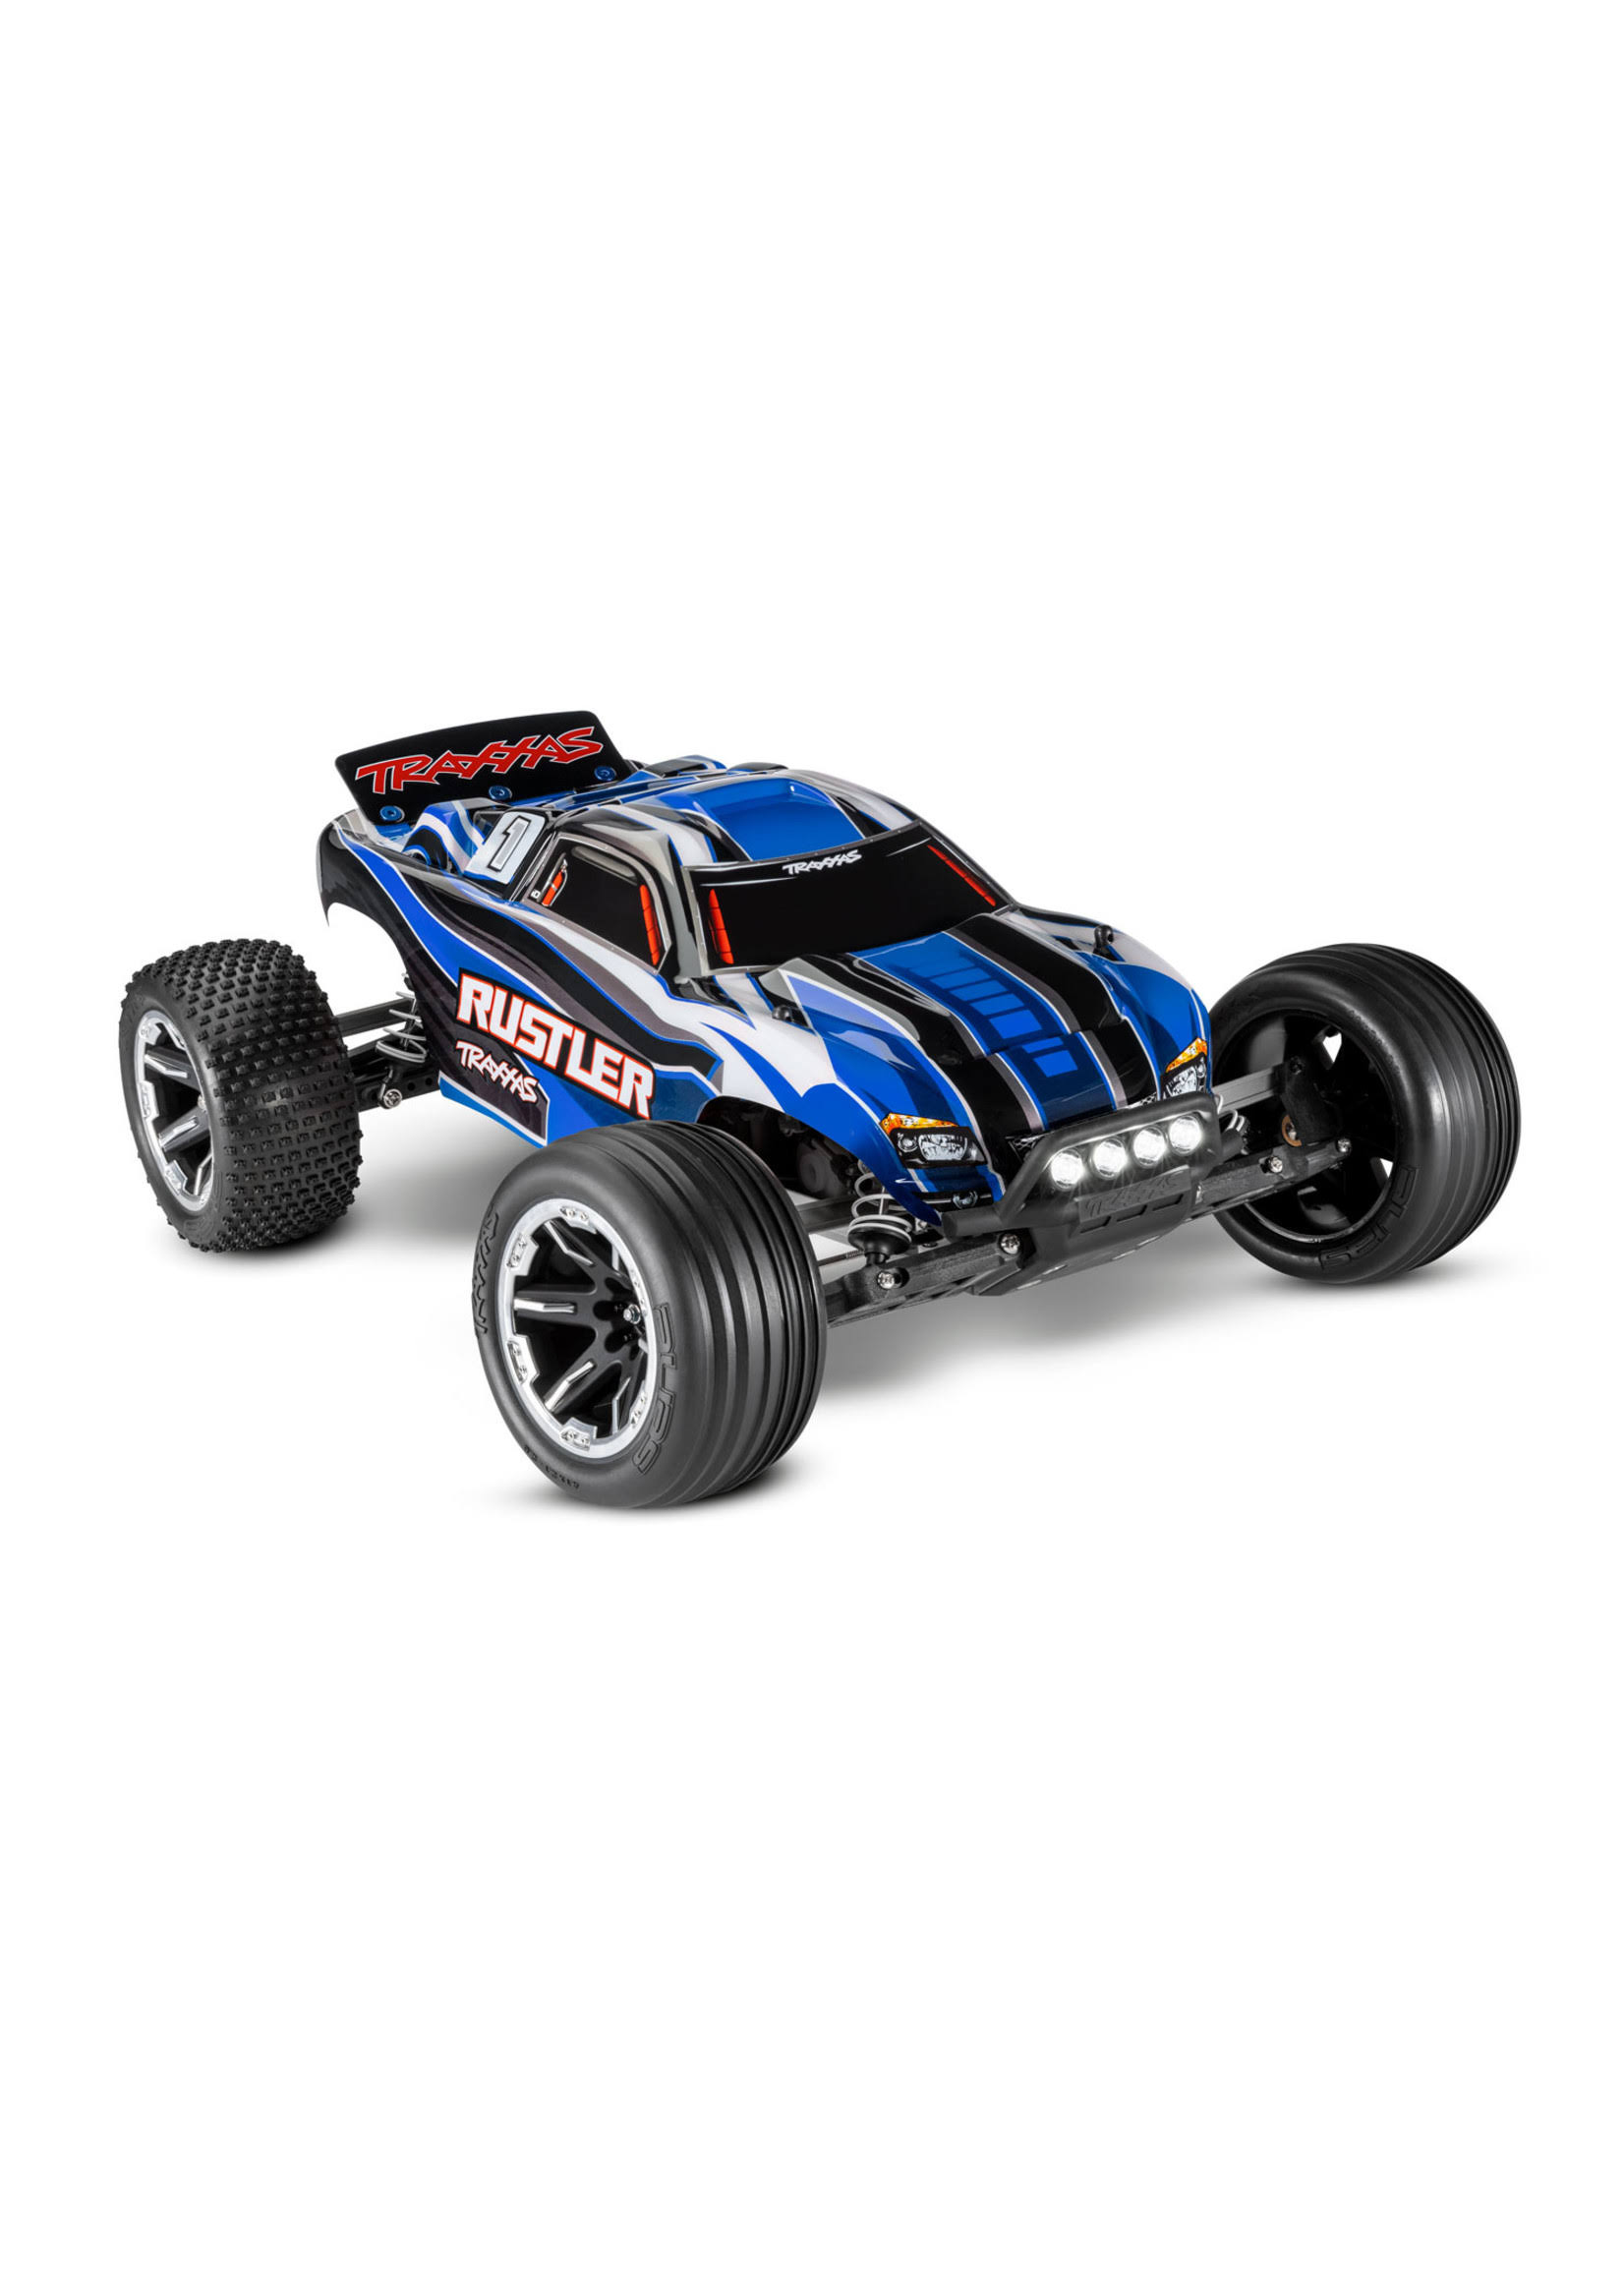 Traxxas 1/10 Rustler 2WD RTR Stadium Truck with LED Lights Blue